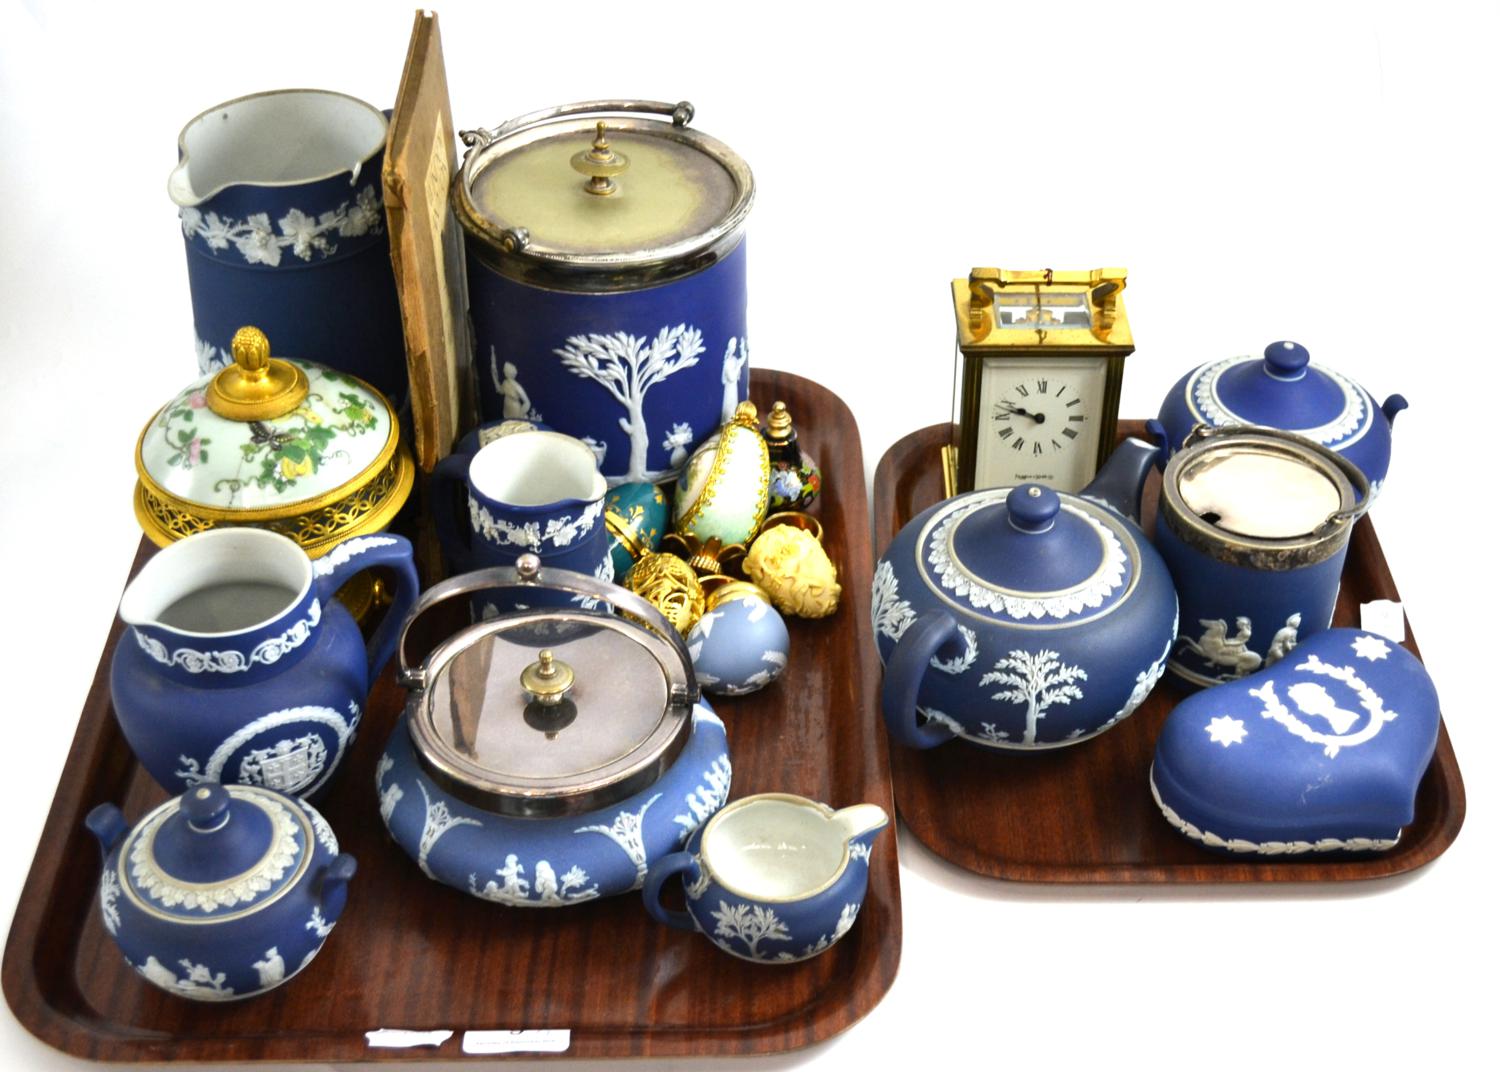 Group of Wedgwood Jasperware, collector's eggs, sketch book and a Mappin & Webb carriage clock